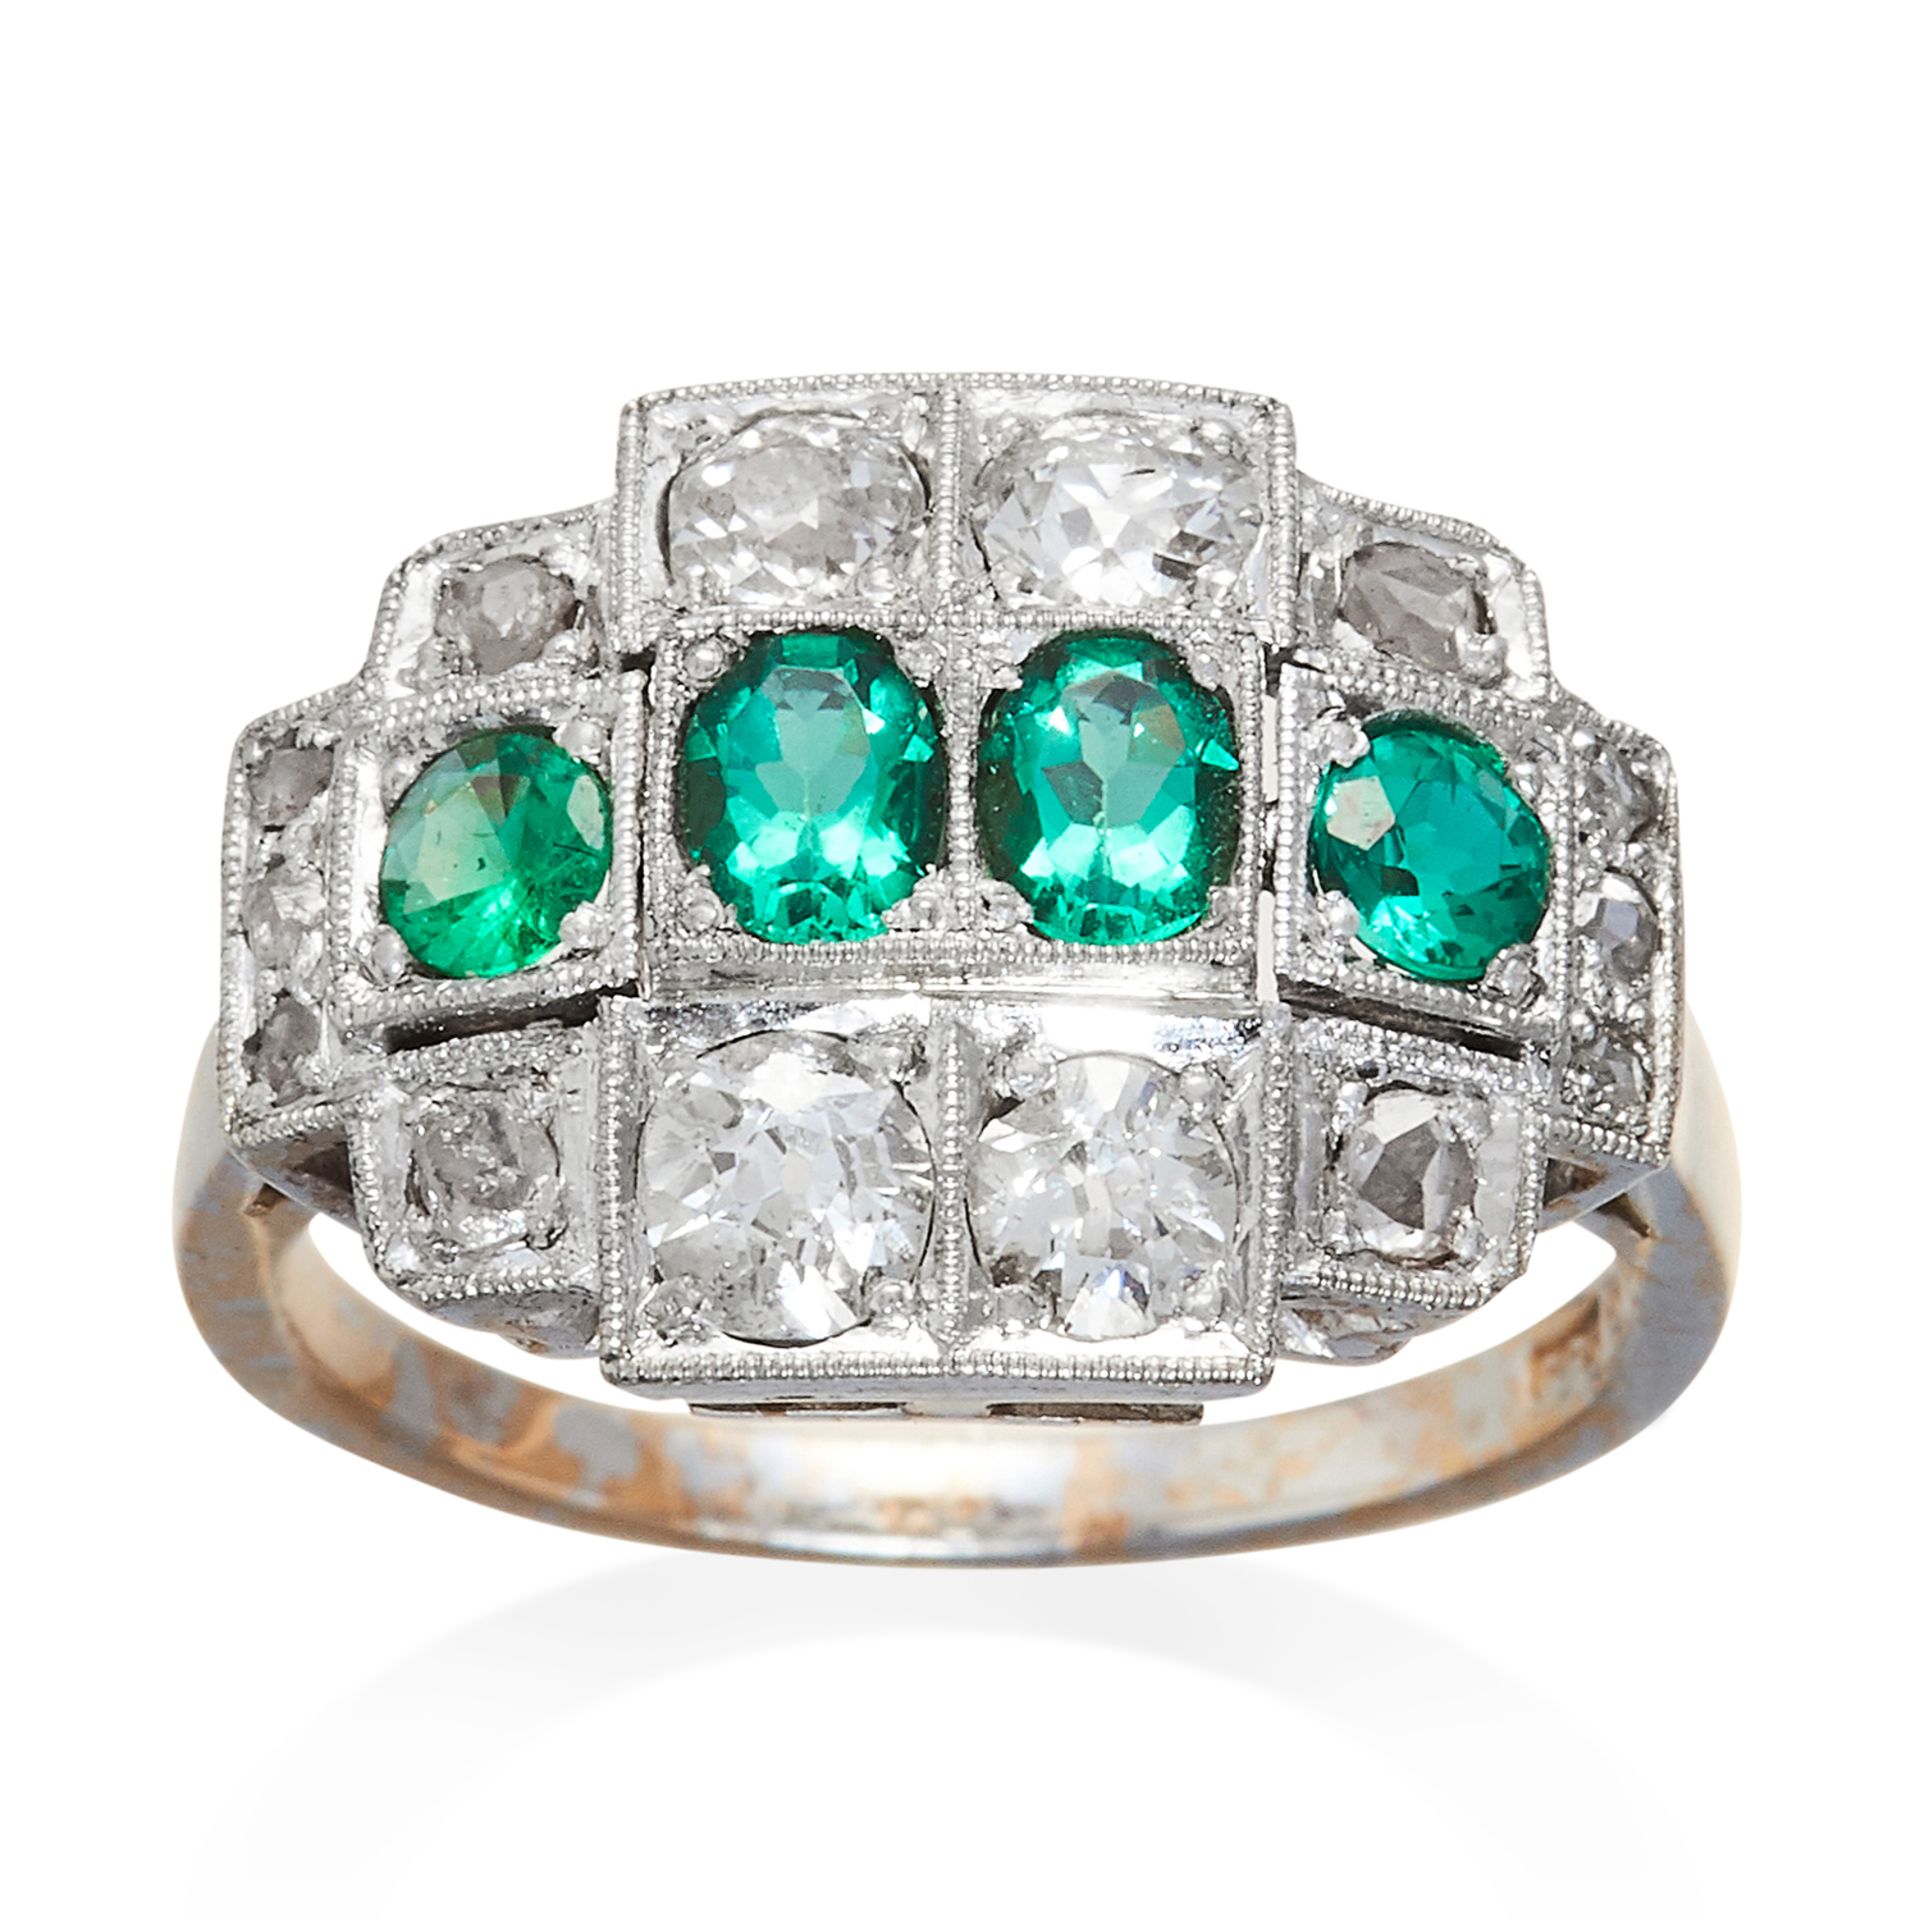 AN ANTIQUE EMERALD AND DIAMOND RING in white gold, four oval cut emeralds accented by round and rose